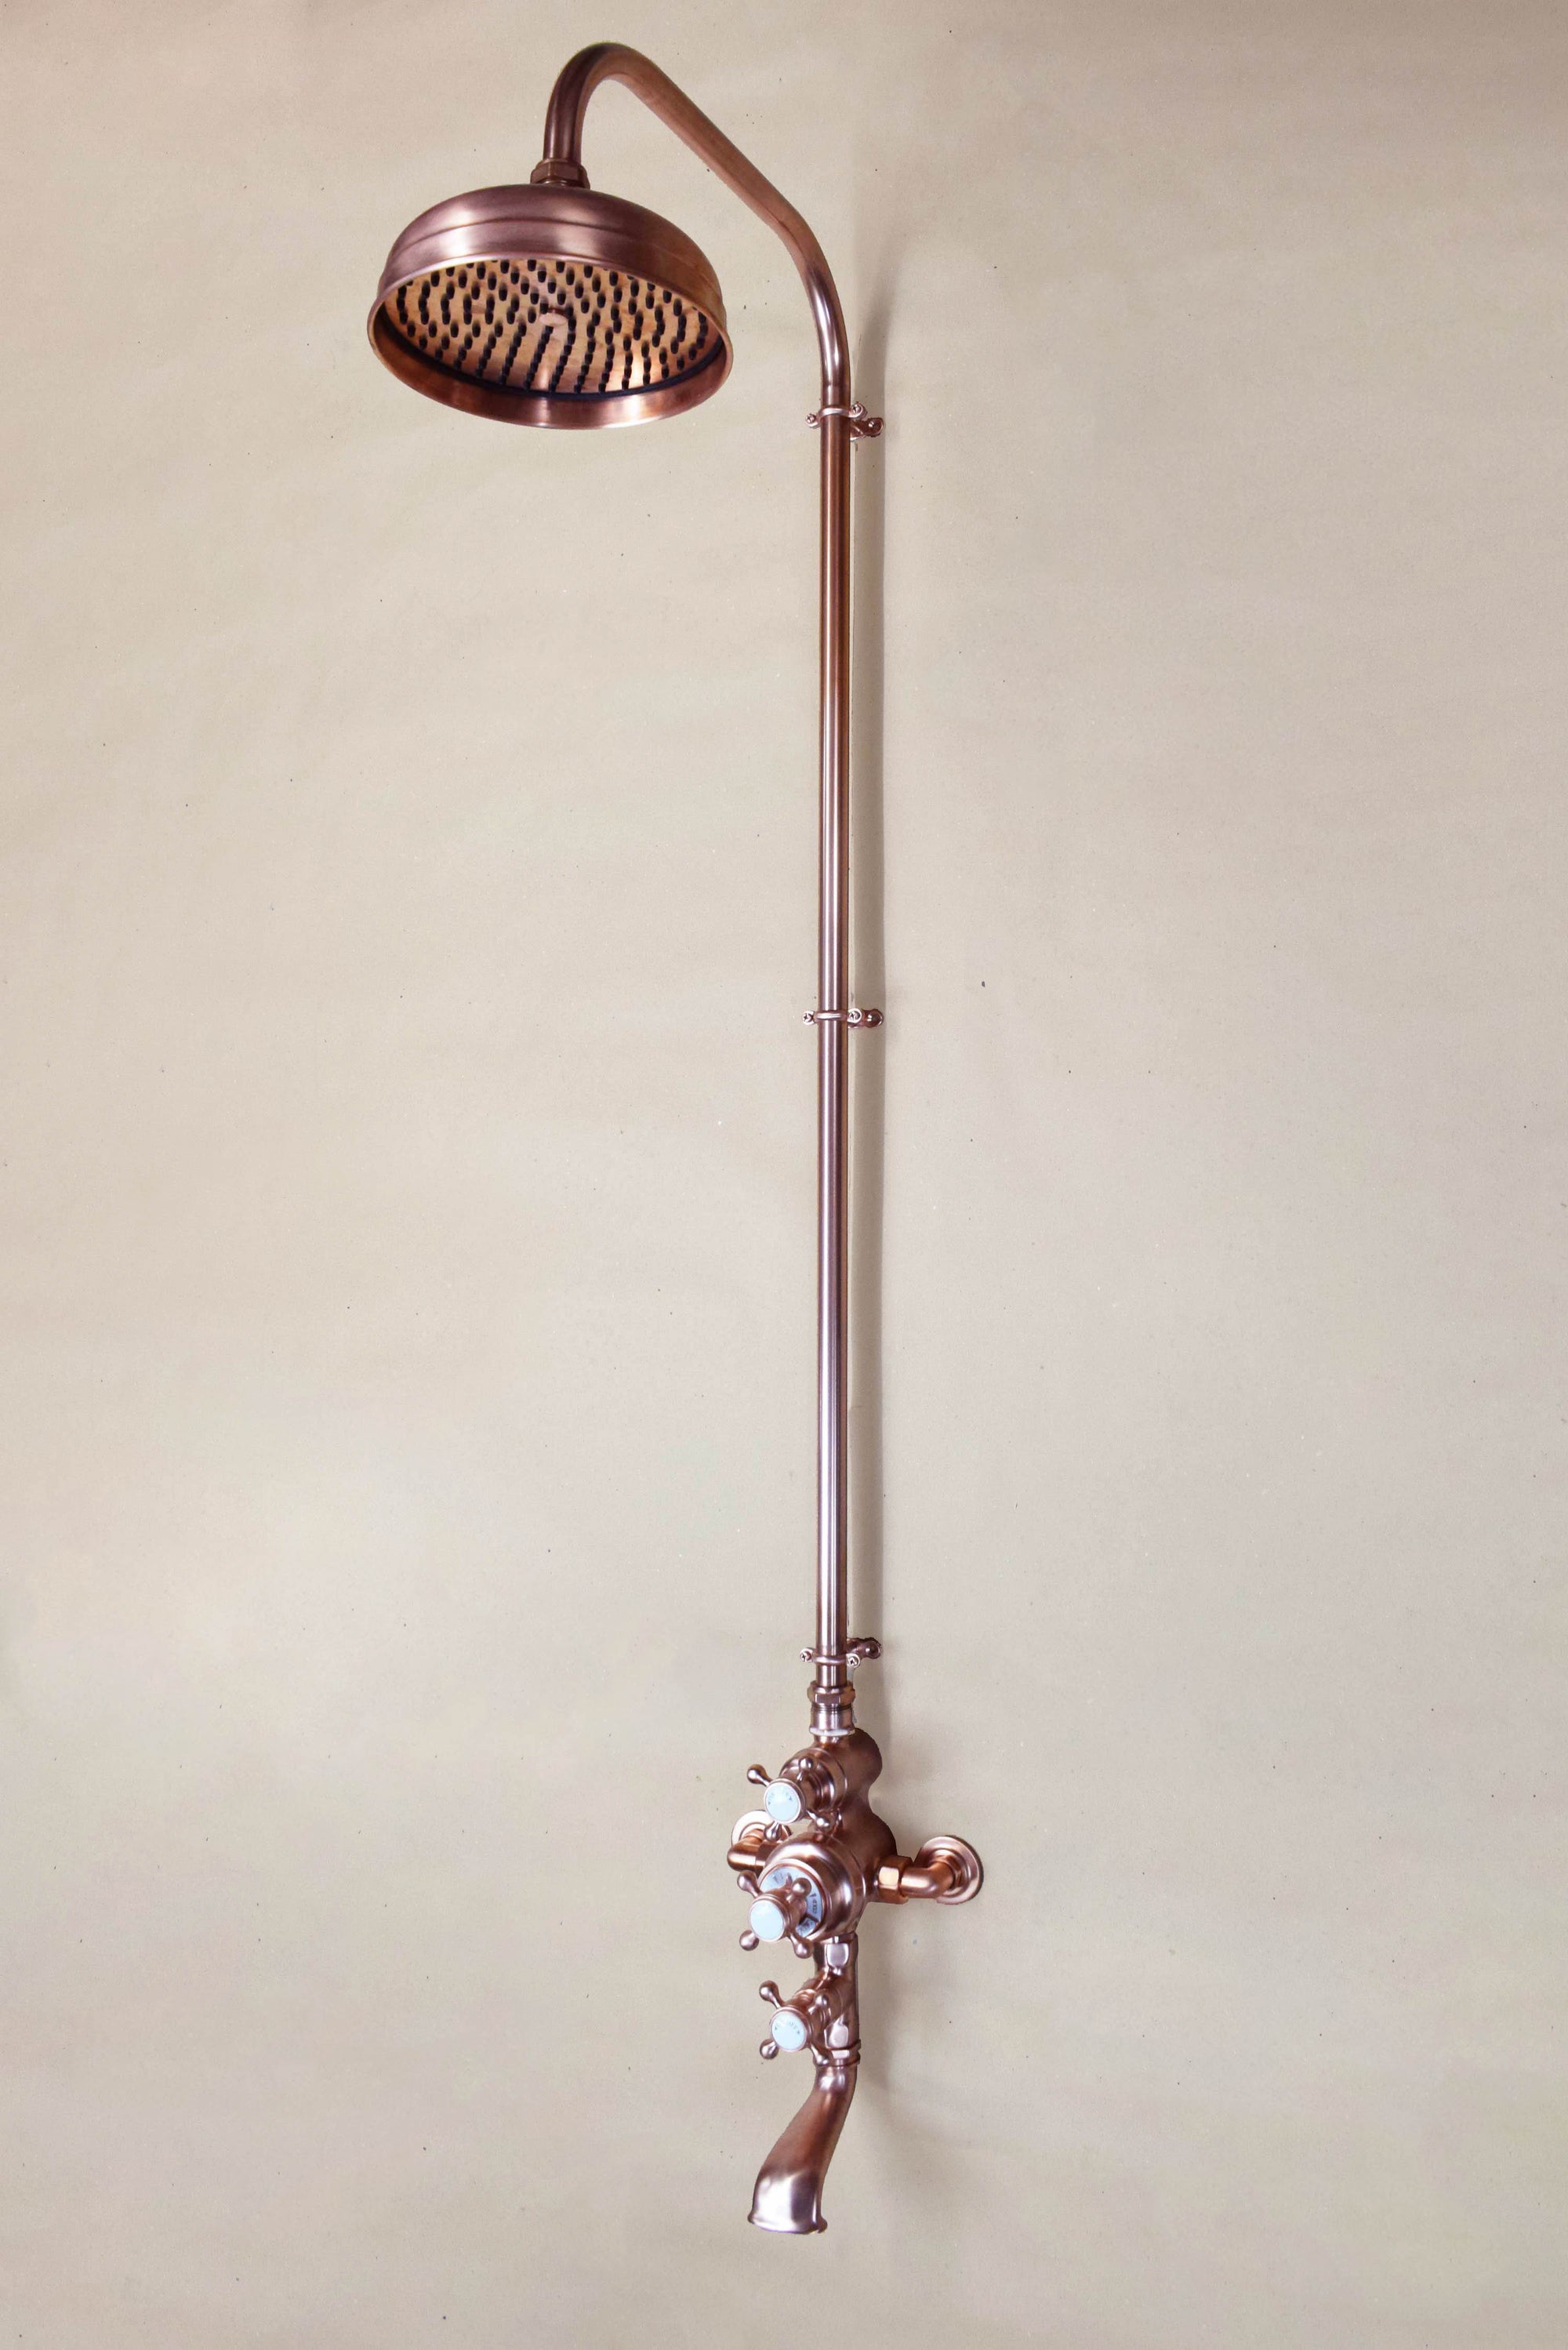 Thermostatic shower bath mixer fully copper finish